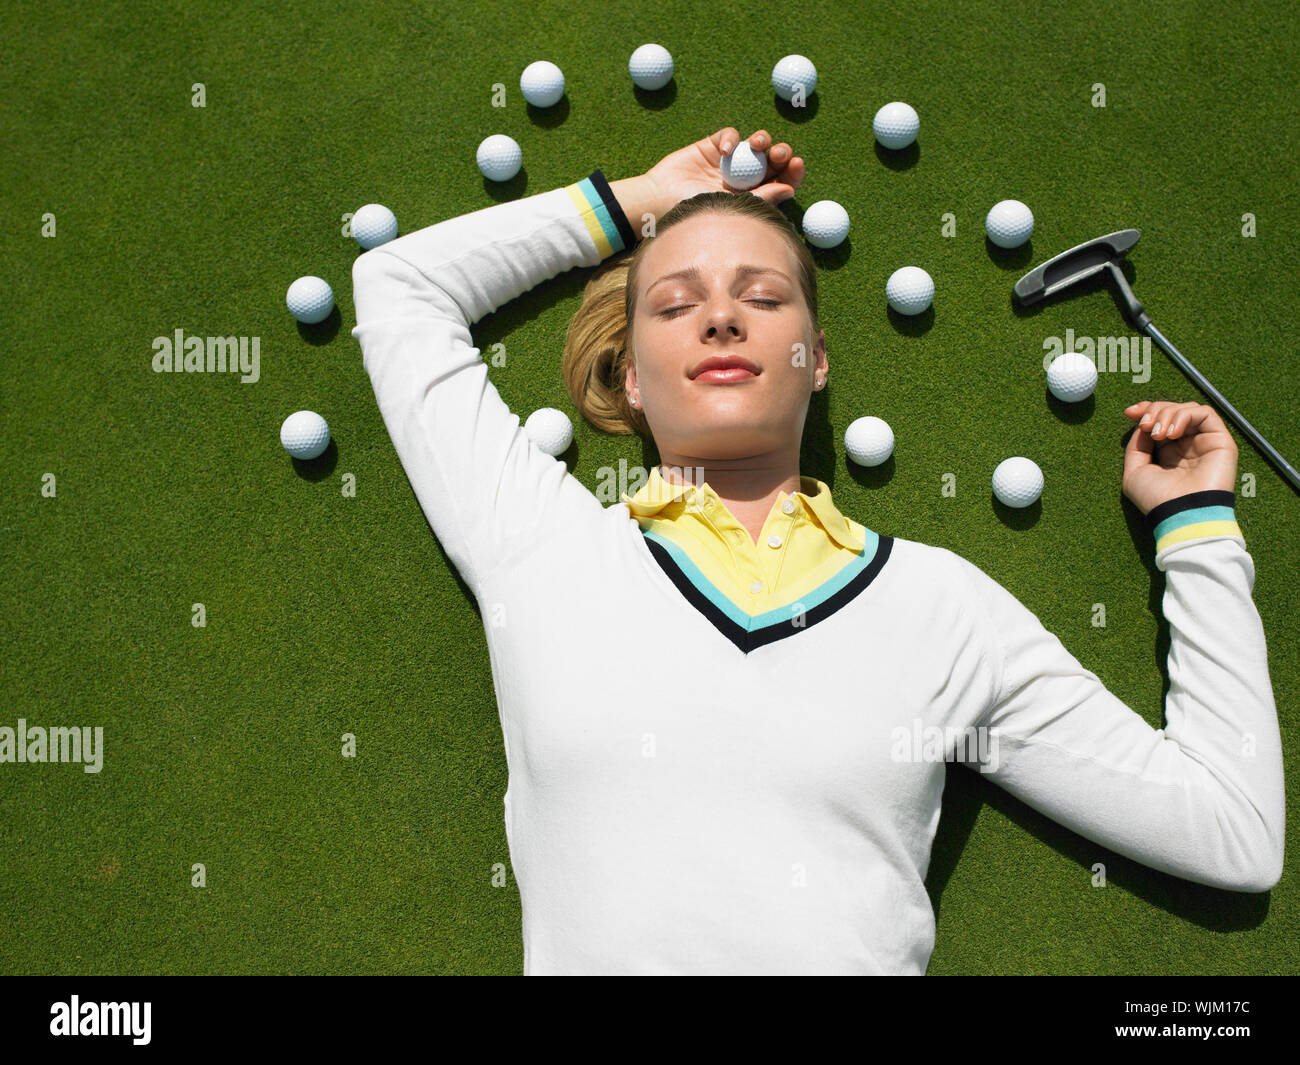 Beautiful female golfer lying on putting green with golf balls and club Stock Photo